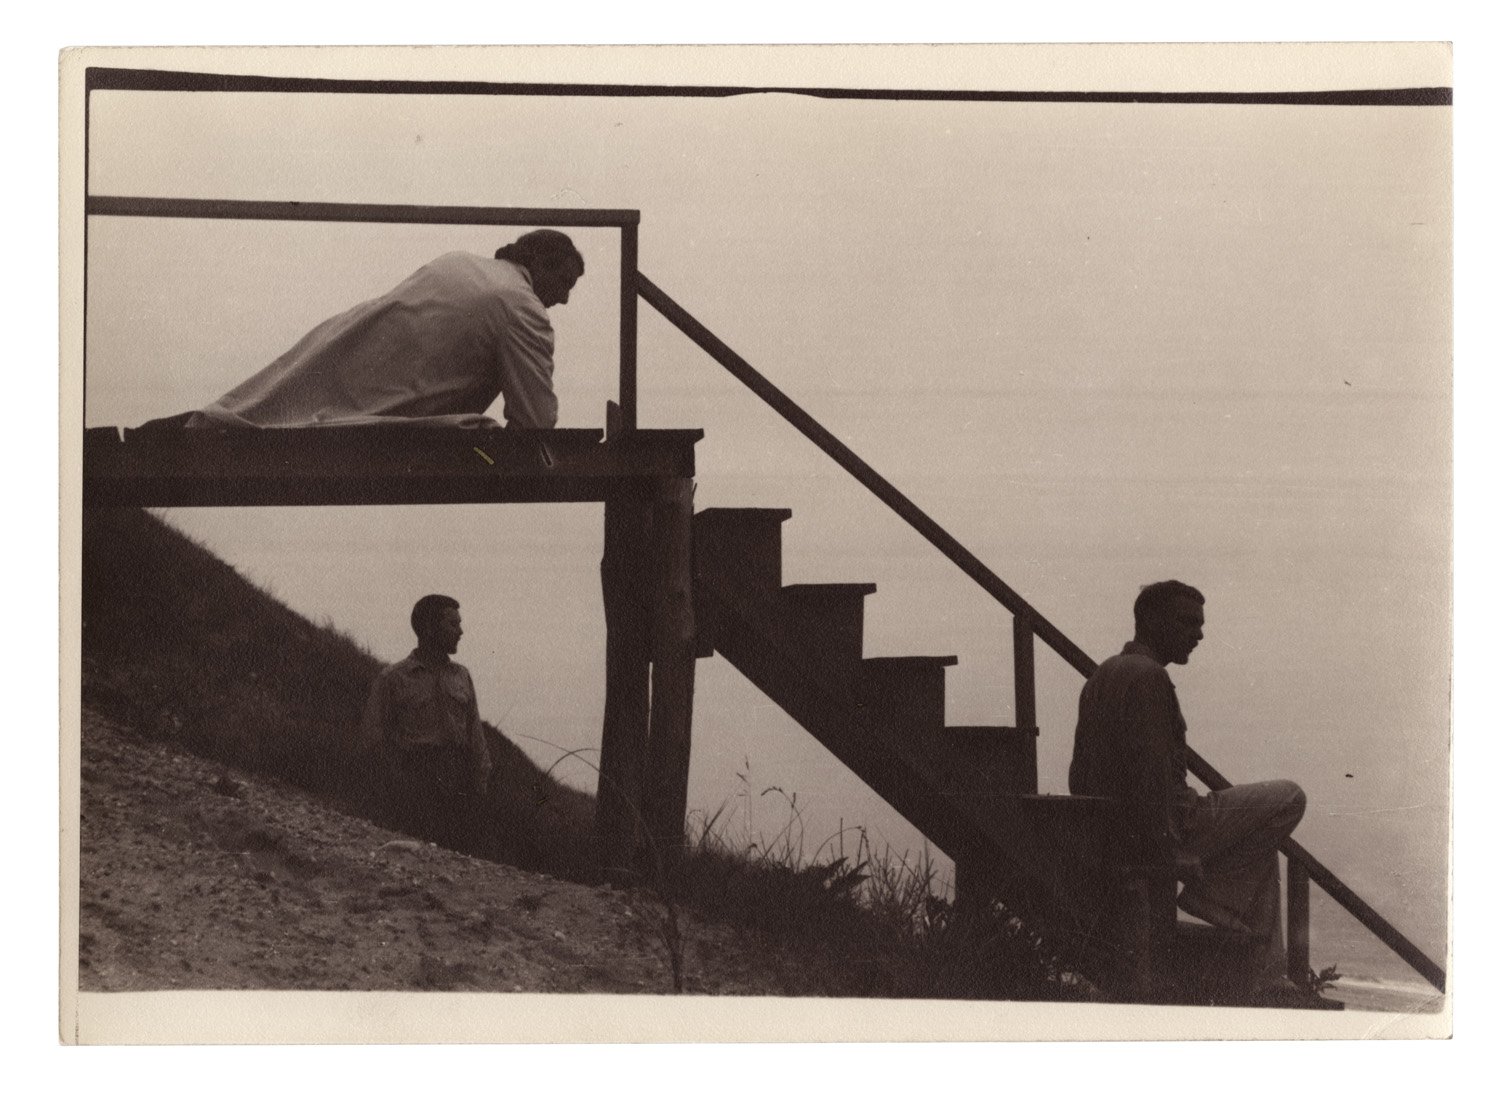 PaJaMa, Margaret French, George Tooker and Jared French, Nantucket, c.1946. Collection Jack Shear Image courtesy of Gitterman Gallery, New York